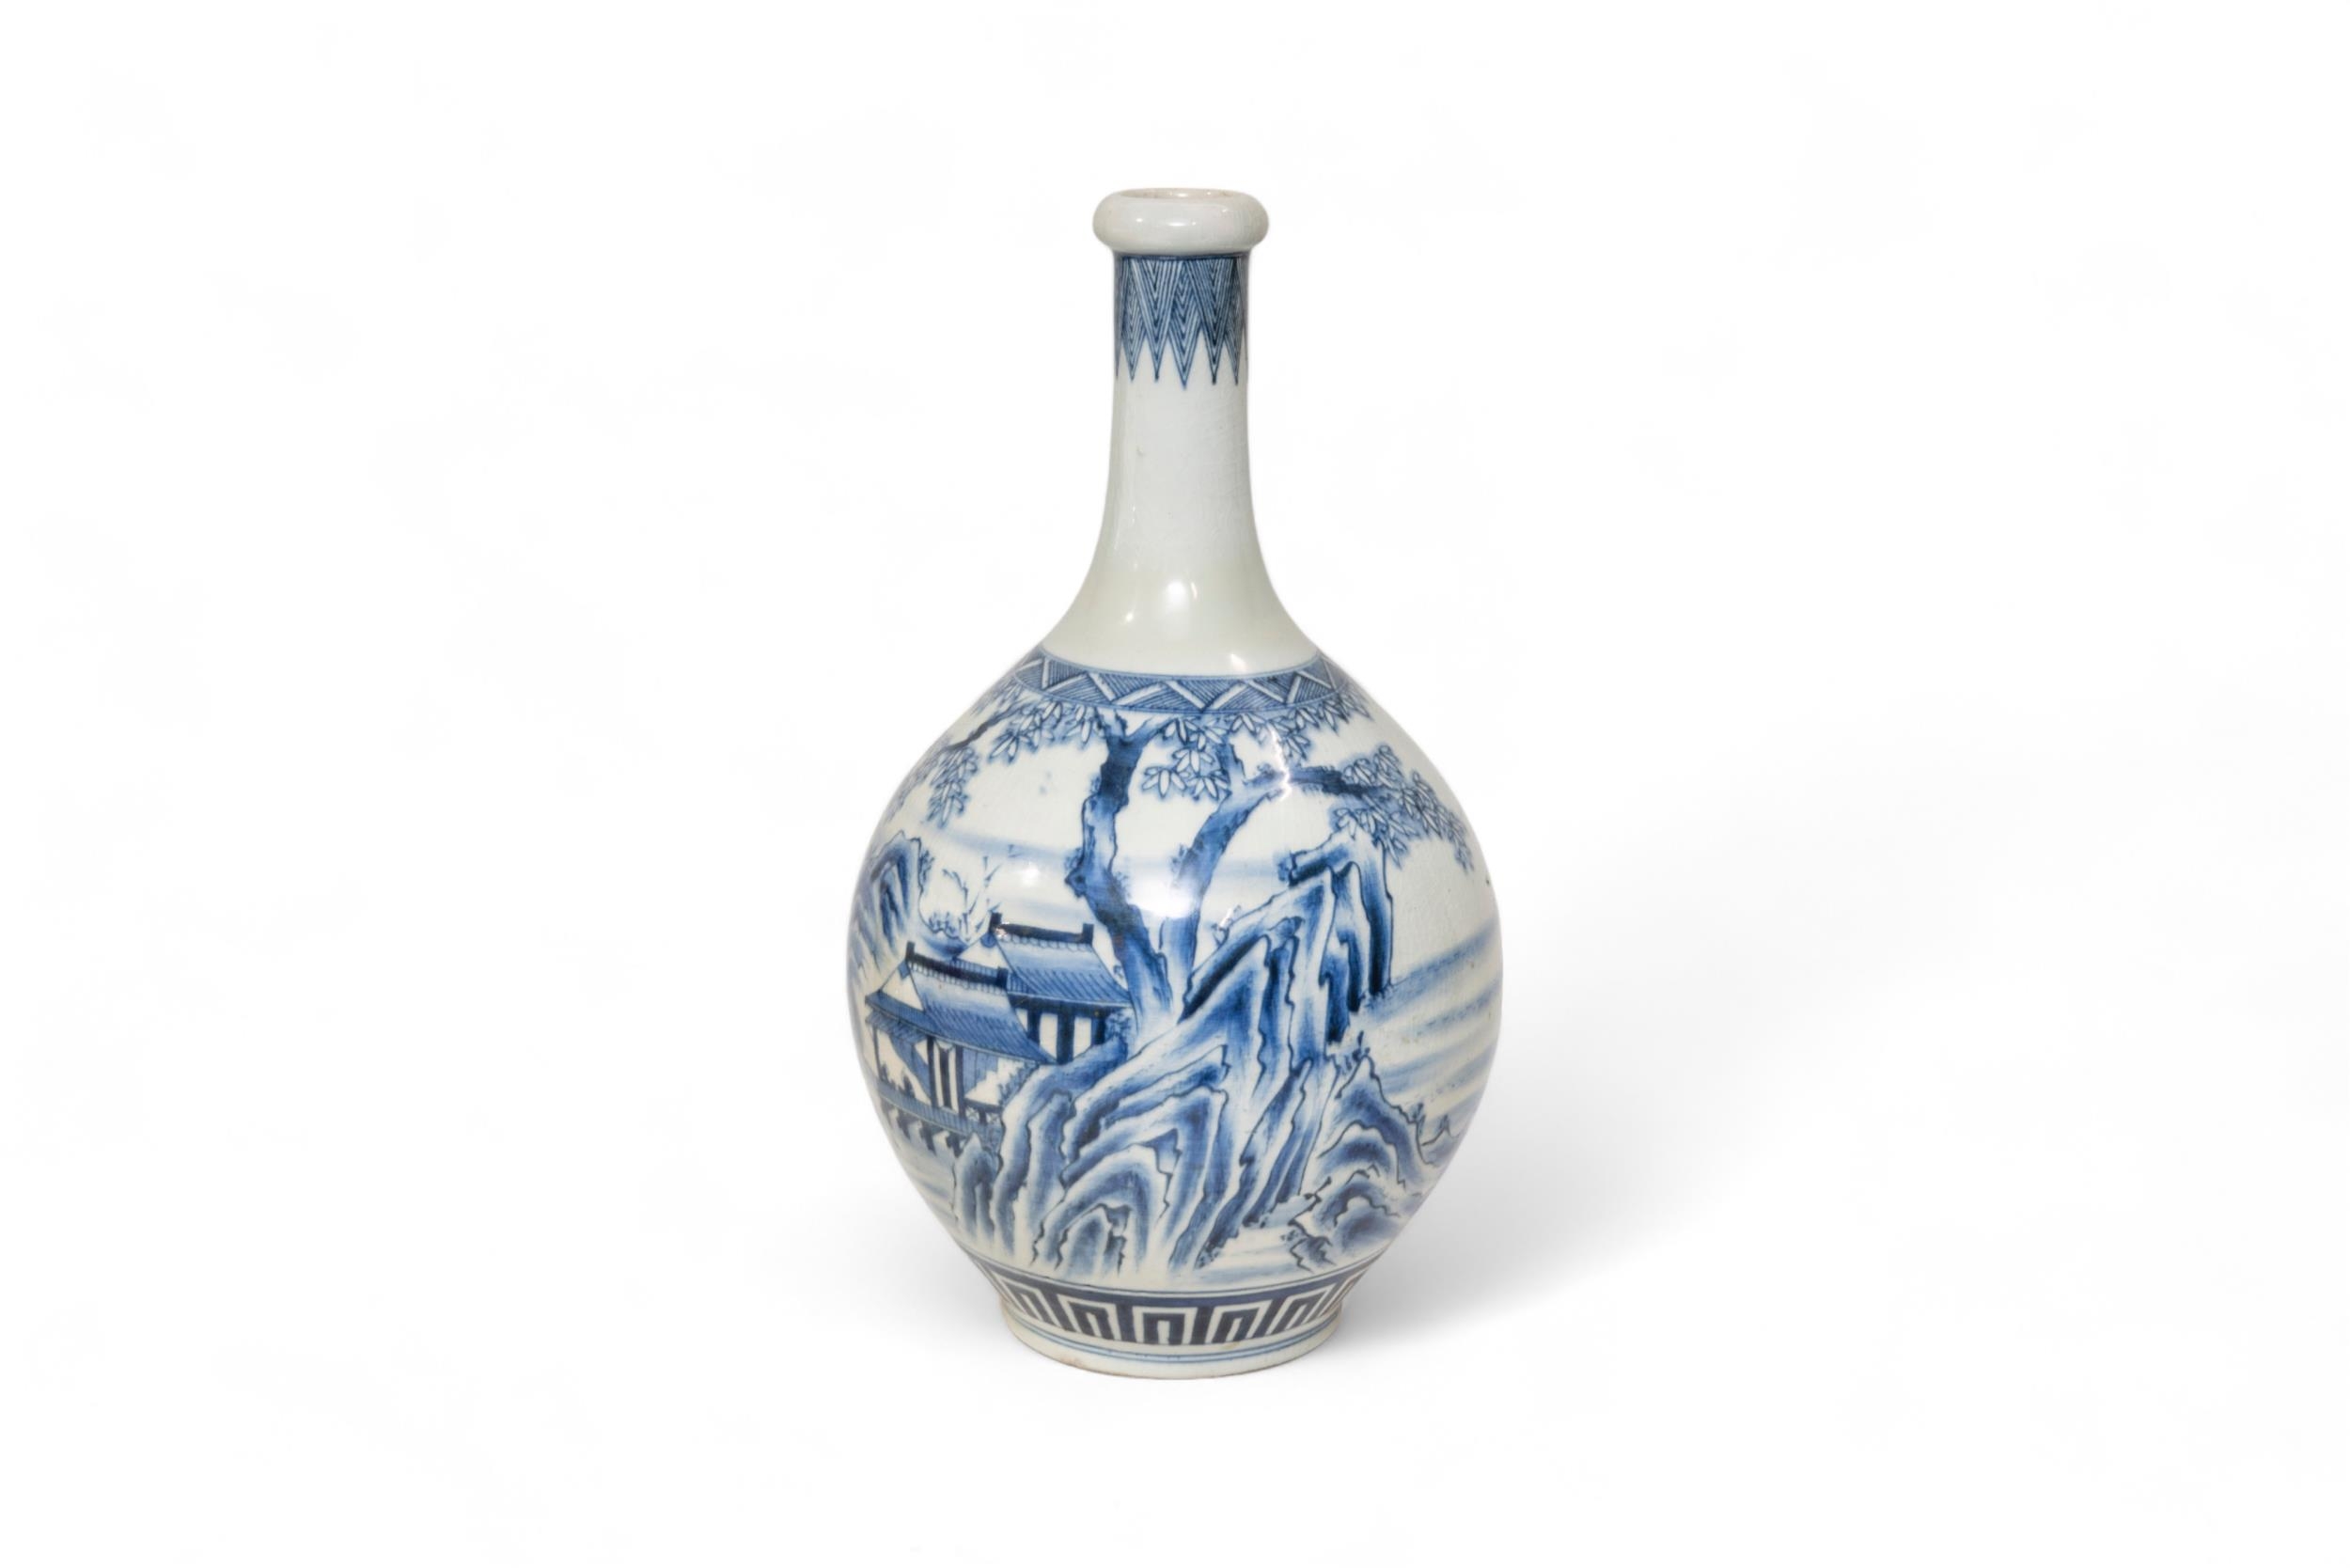 A GROUP OF FIVE JAPANESE PORCELAIN VASES 19TH / 20TH CENTURY largest, 46cm high, smallest, 24cm